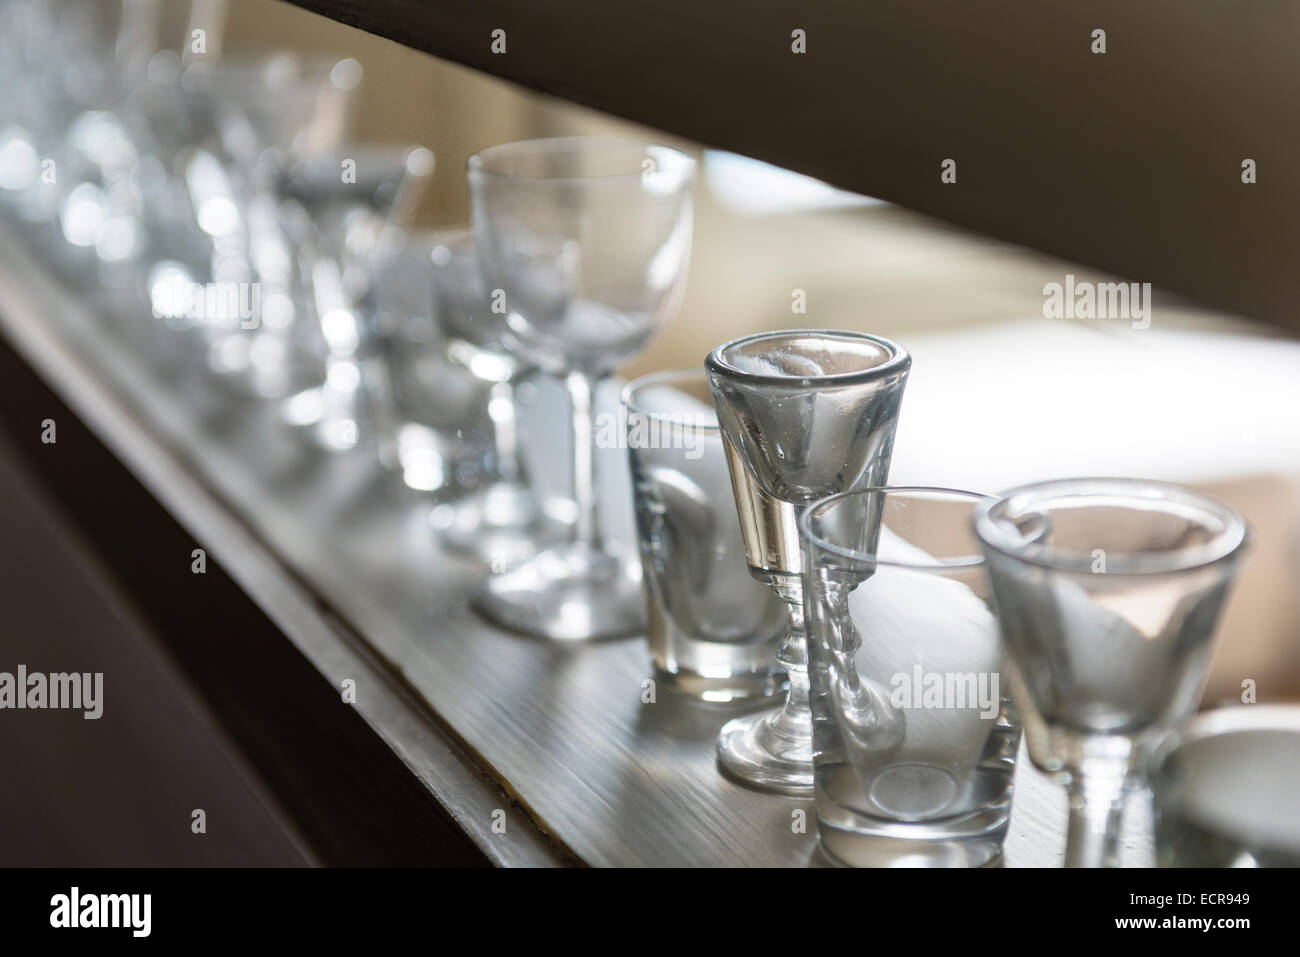 Row of small drinks glasses on shelf Stock Photo